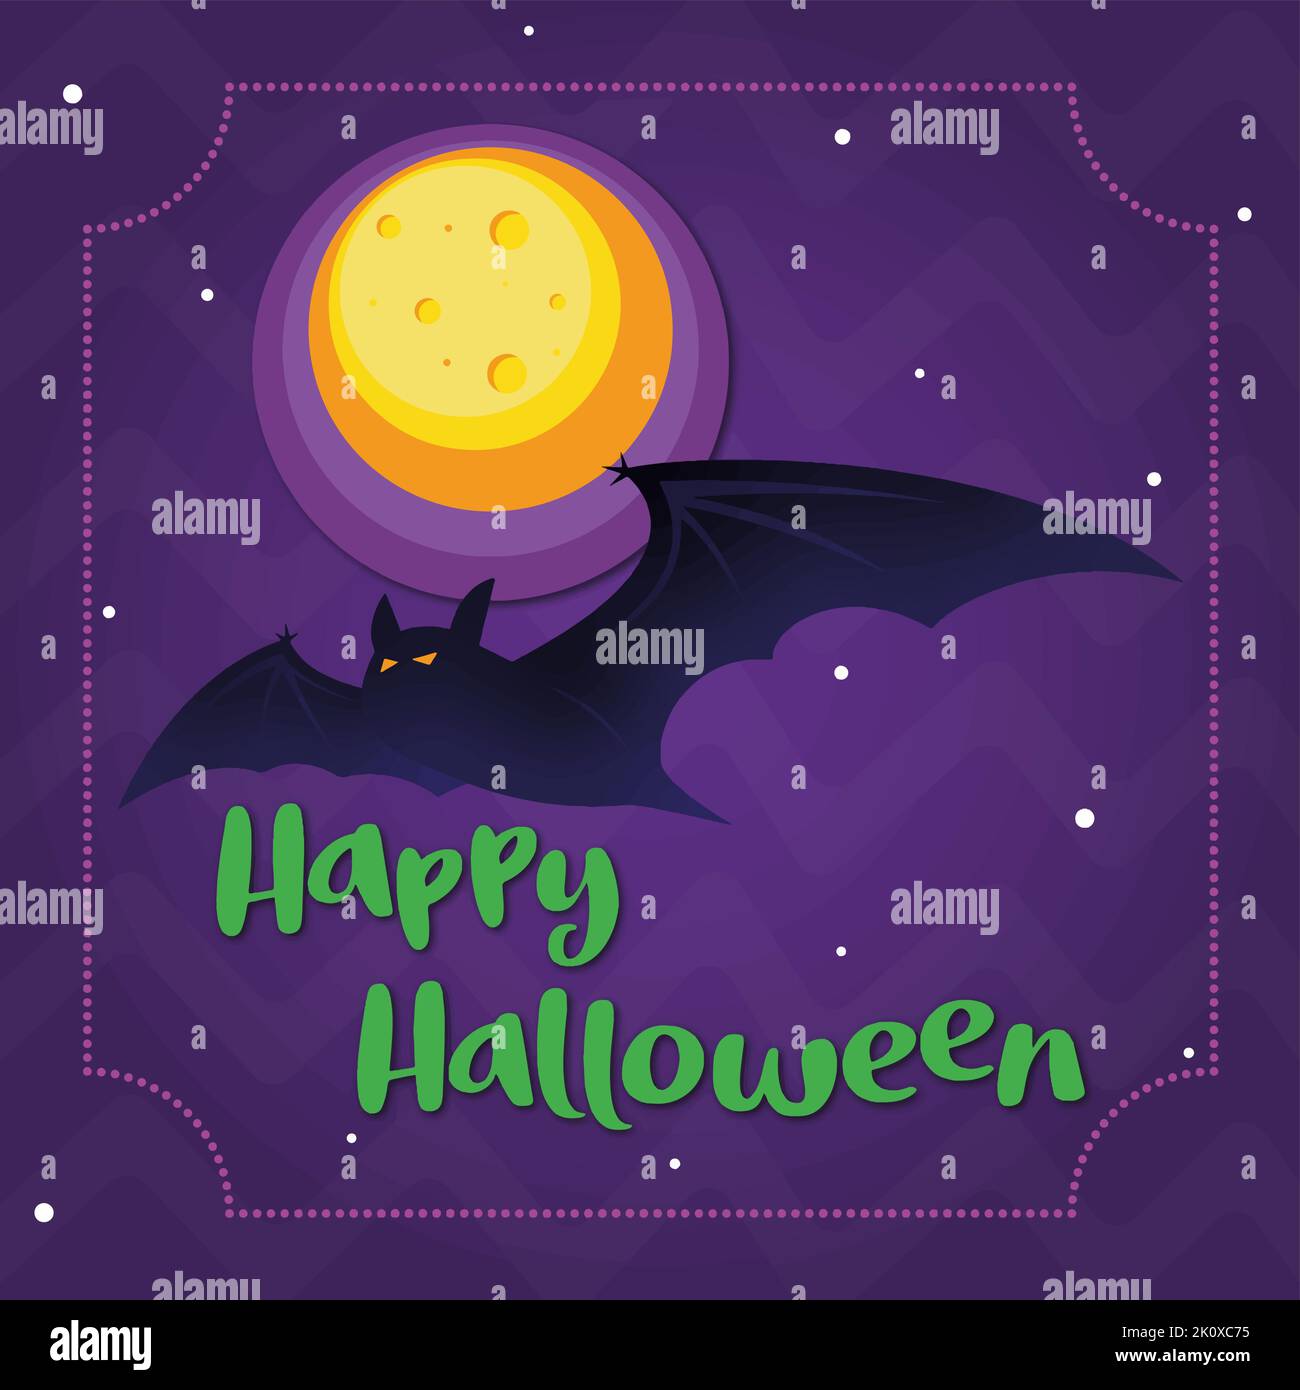 halloween greeting card with moon and bat Stock Vector